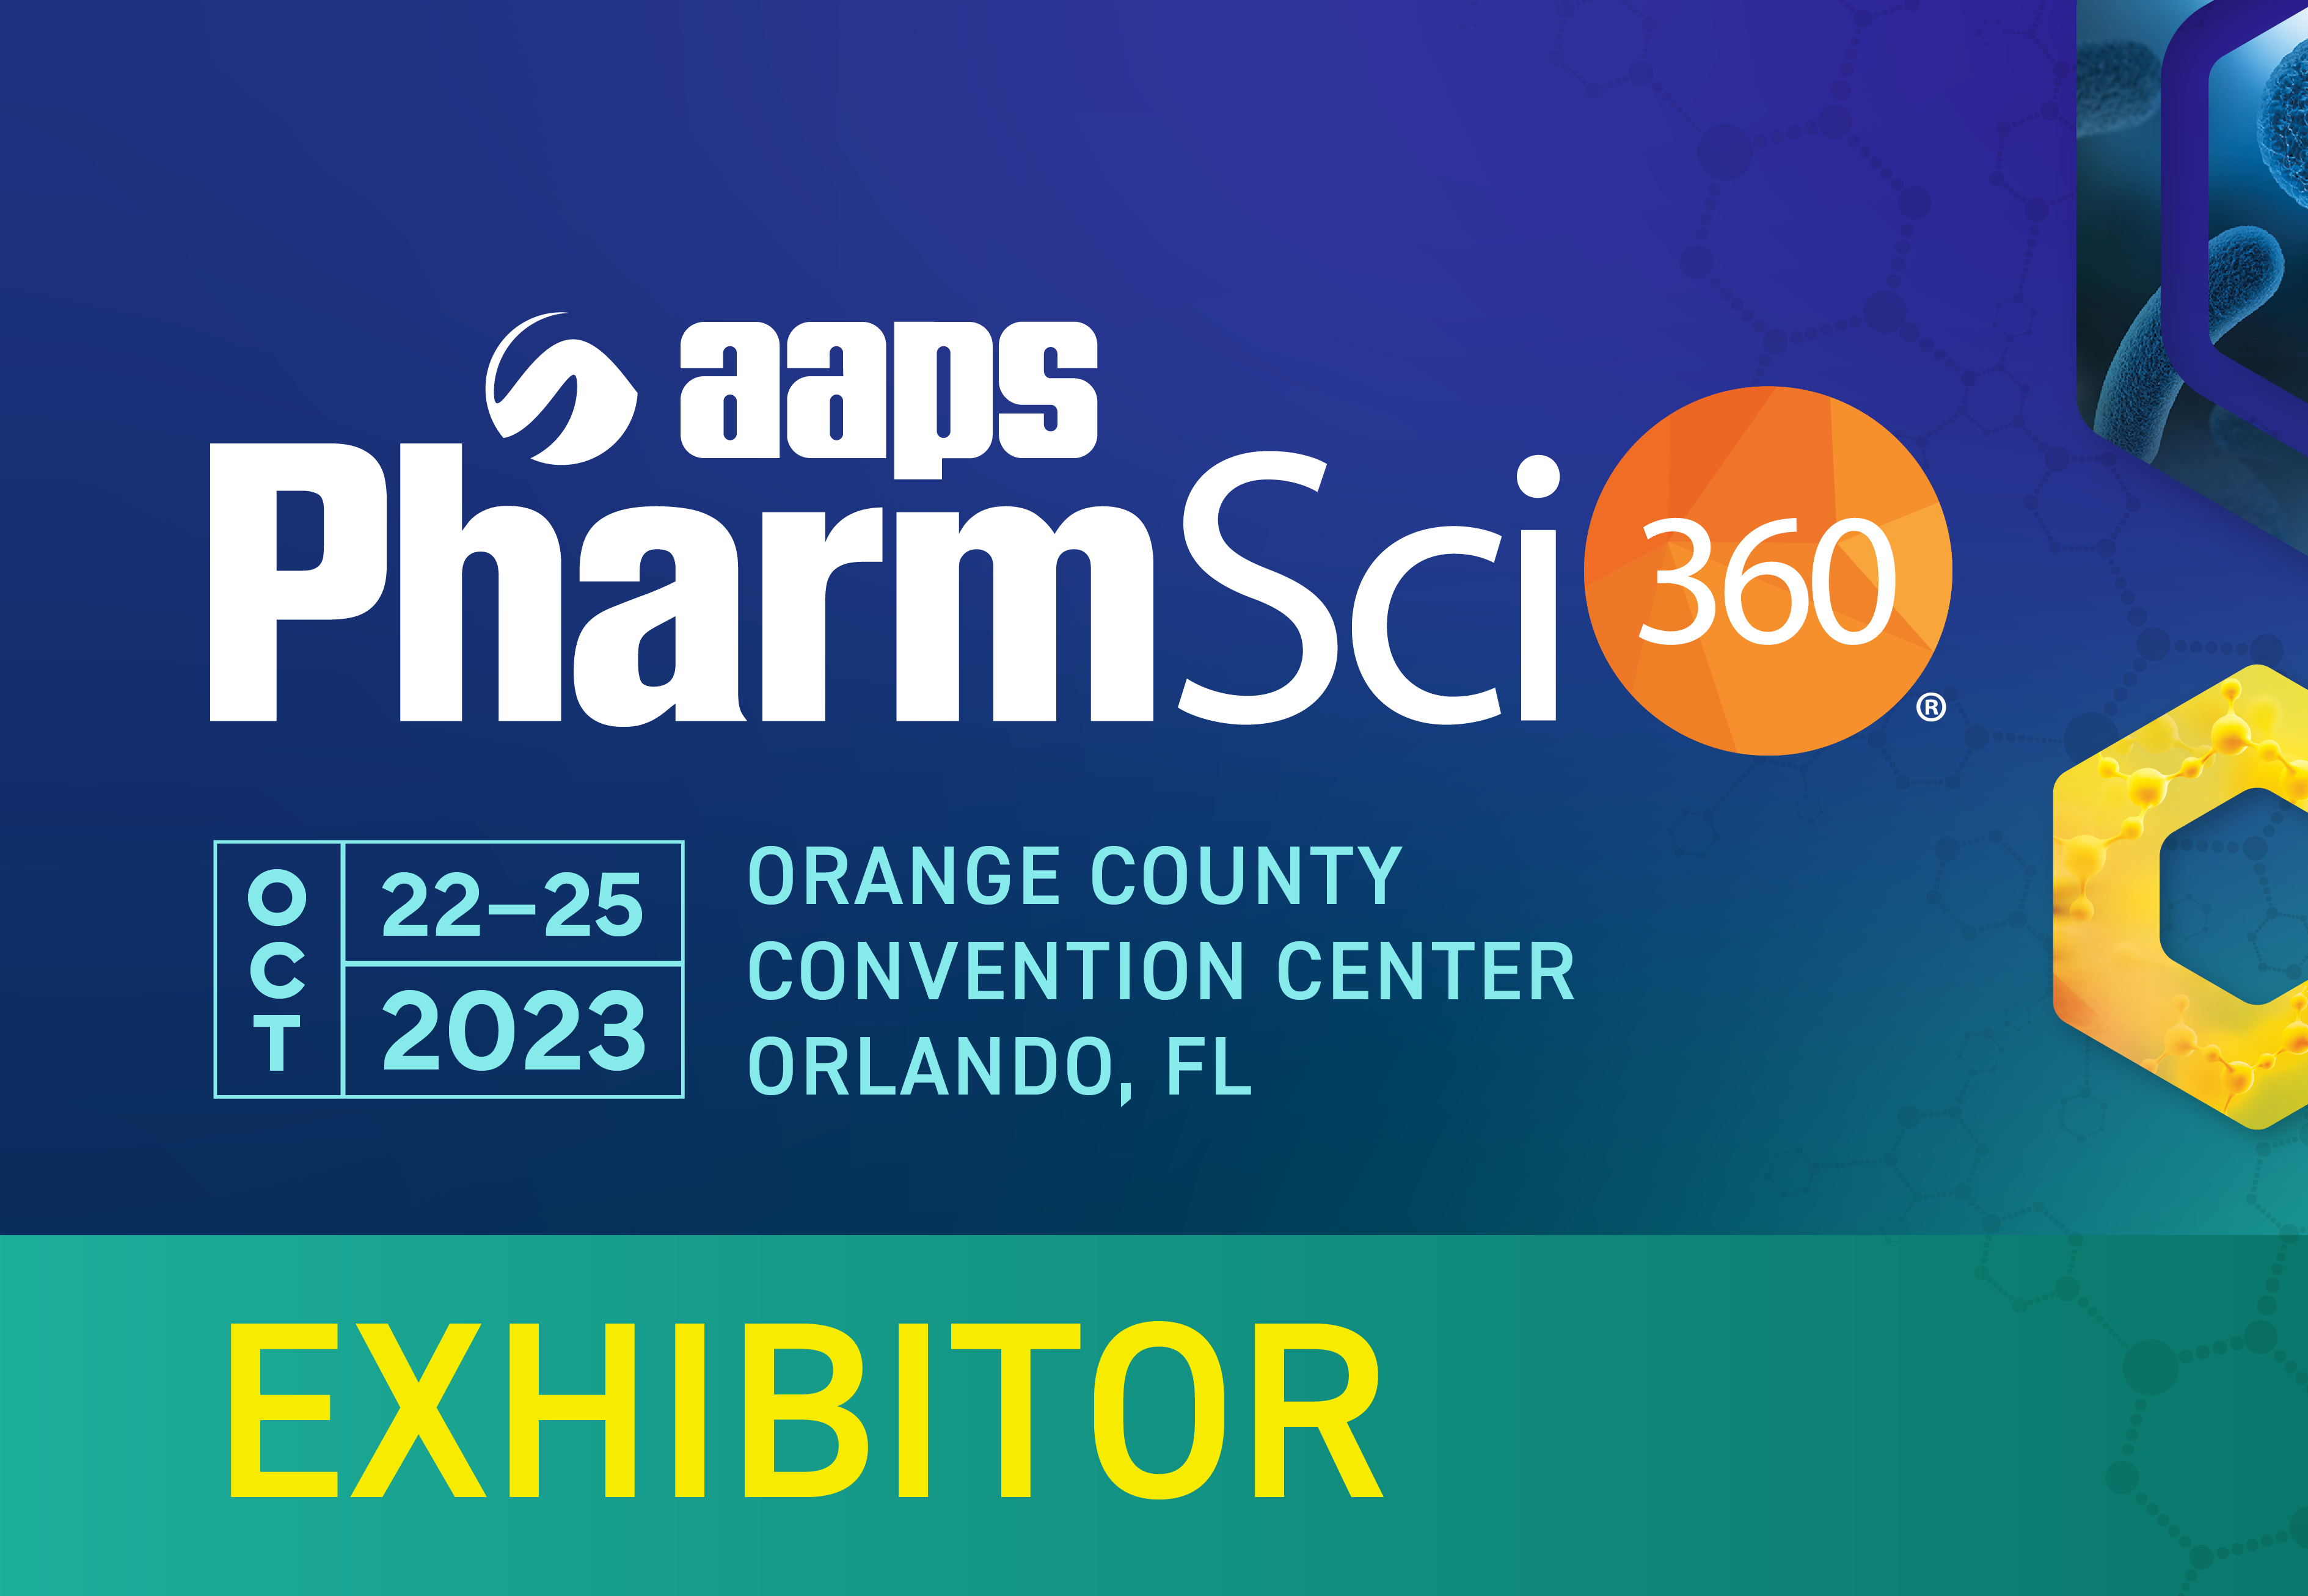 Learning Opportunities Abound at AAPS 2023 PharmSci 360